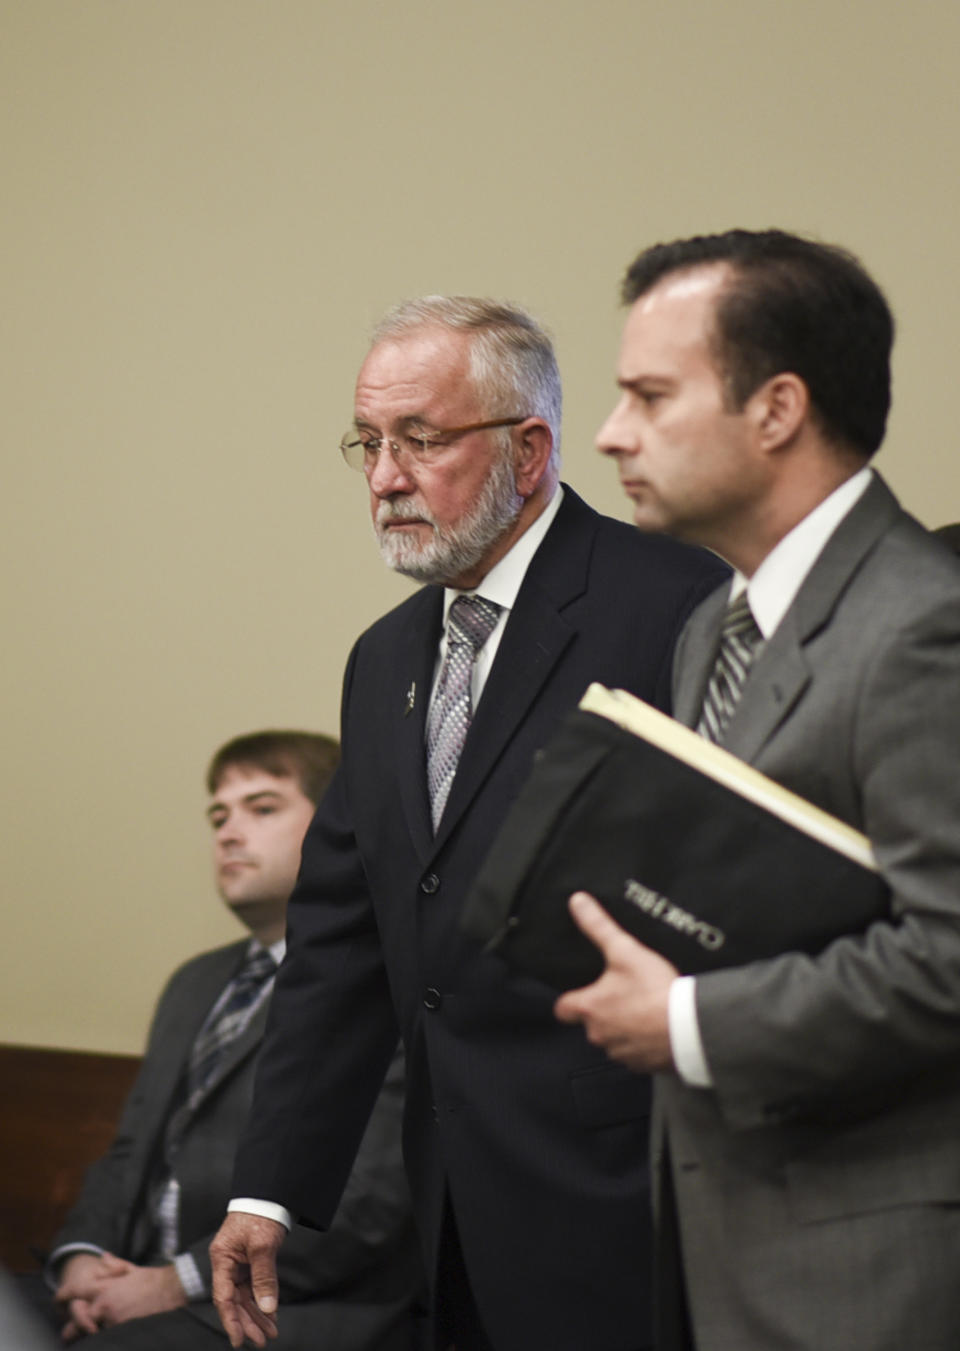 William Strampel, left, former dean at the College of Osteopathic Medicine at Michigan State University in East Lansing, Michigan, enters Ingham County Circuit Court Wednesday, June 12, 2019, with his attorney John Dakmak. Strample was found guilty Wednesday of neglect of duty and misconduct in office but acquitted on a more serious criminal sexual conduct charge. (Matthew Dae Smith/Lansing State Journal via AP)